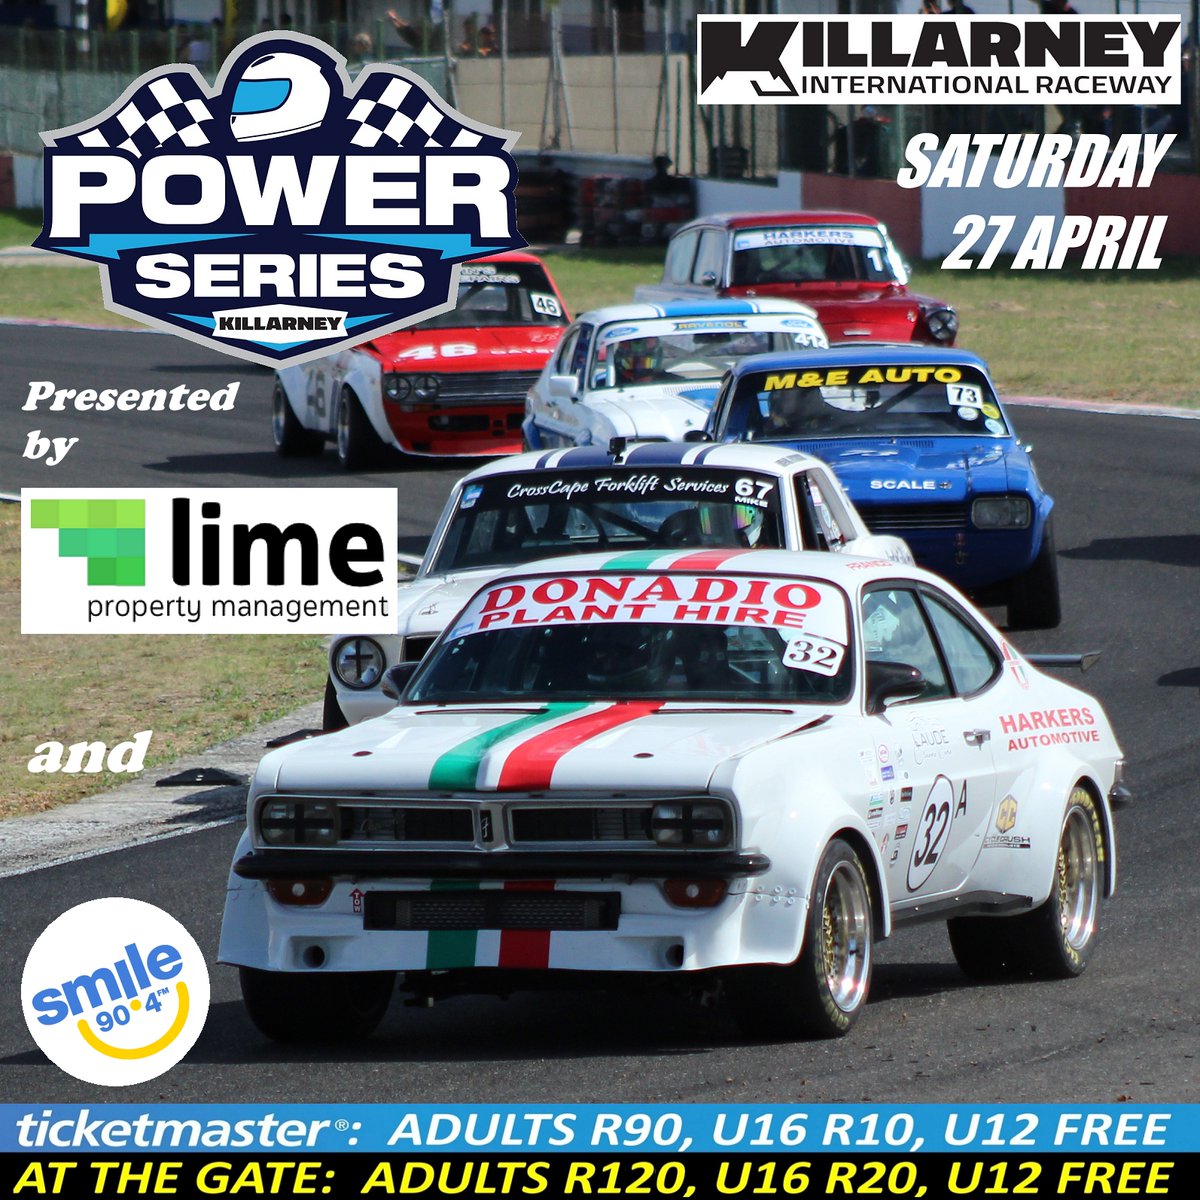 Celebrate Freedom Day with a thrilling day of motorsport action at the Power Series presented by Lime Property Management in association with Smile 90.4 FM on Saturday 27 April. READ MORE: facebook.com/events/3983409… TICKETS: ticketmaster.co.za/event/killarne…